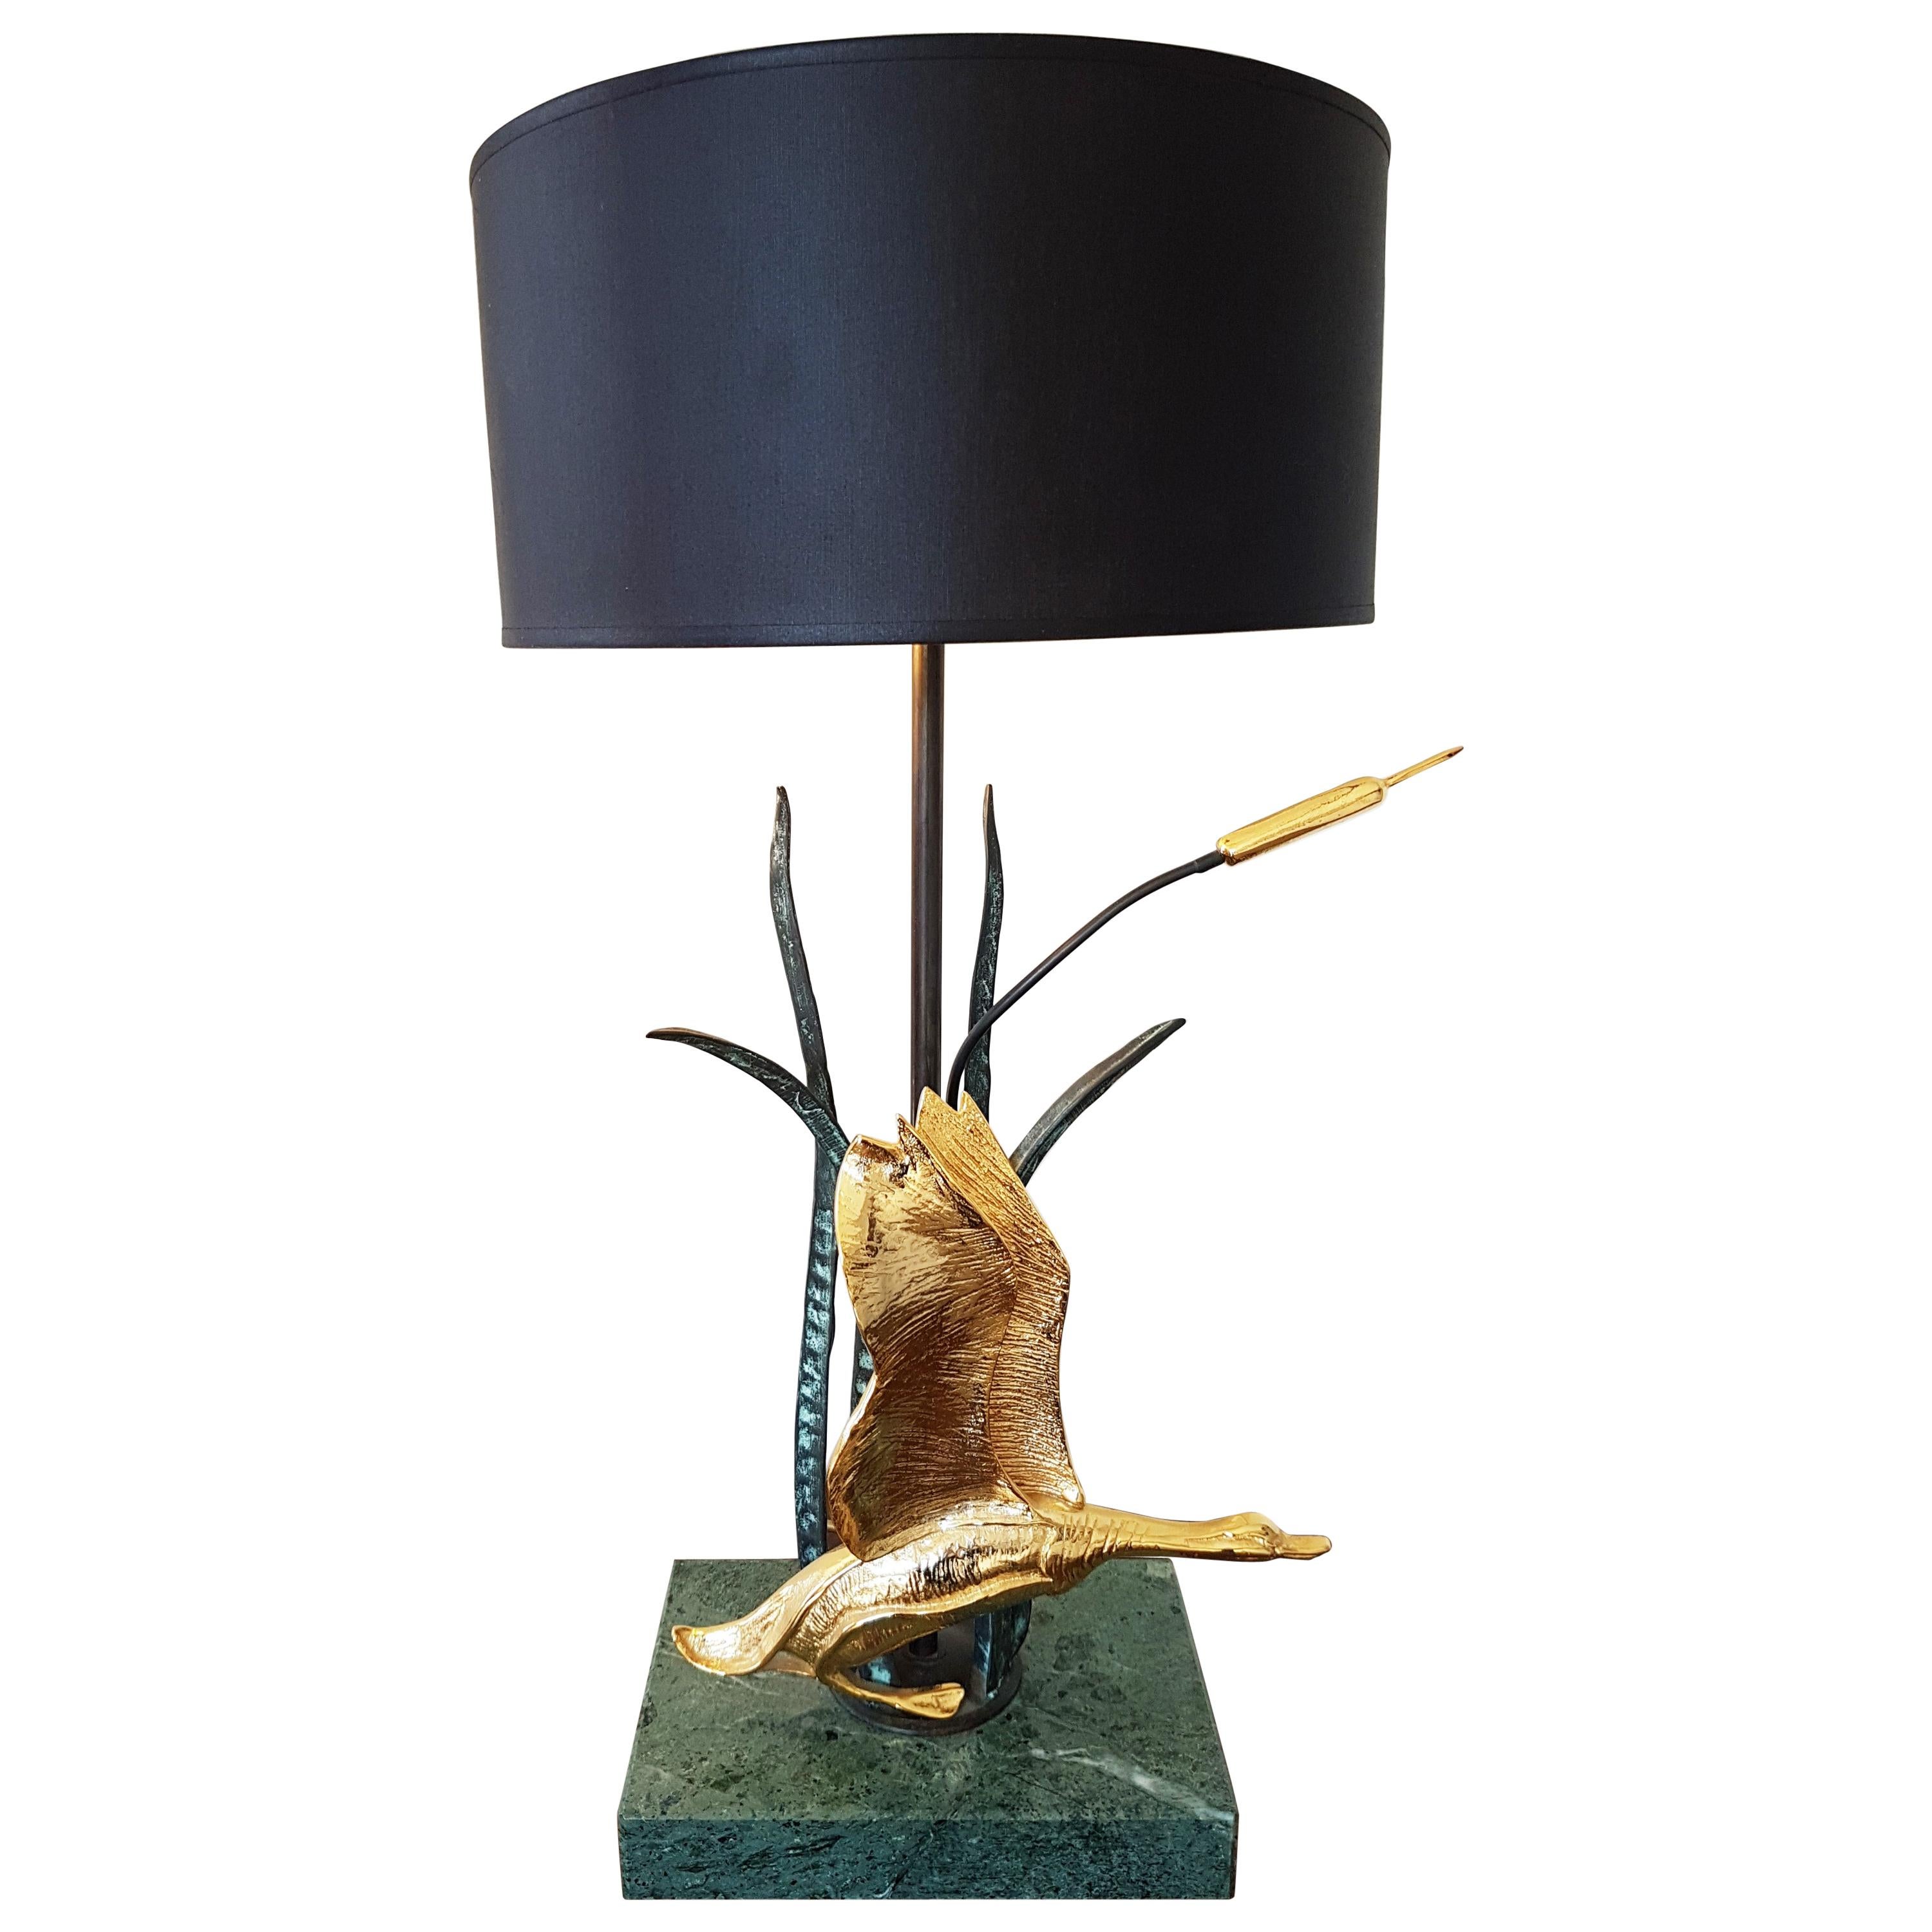 Vintage Table Lamp by L. Galeotti, 1970s